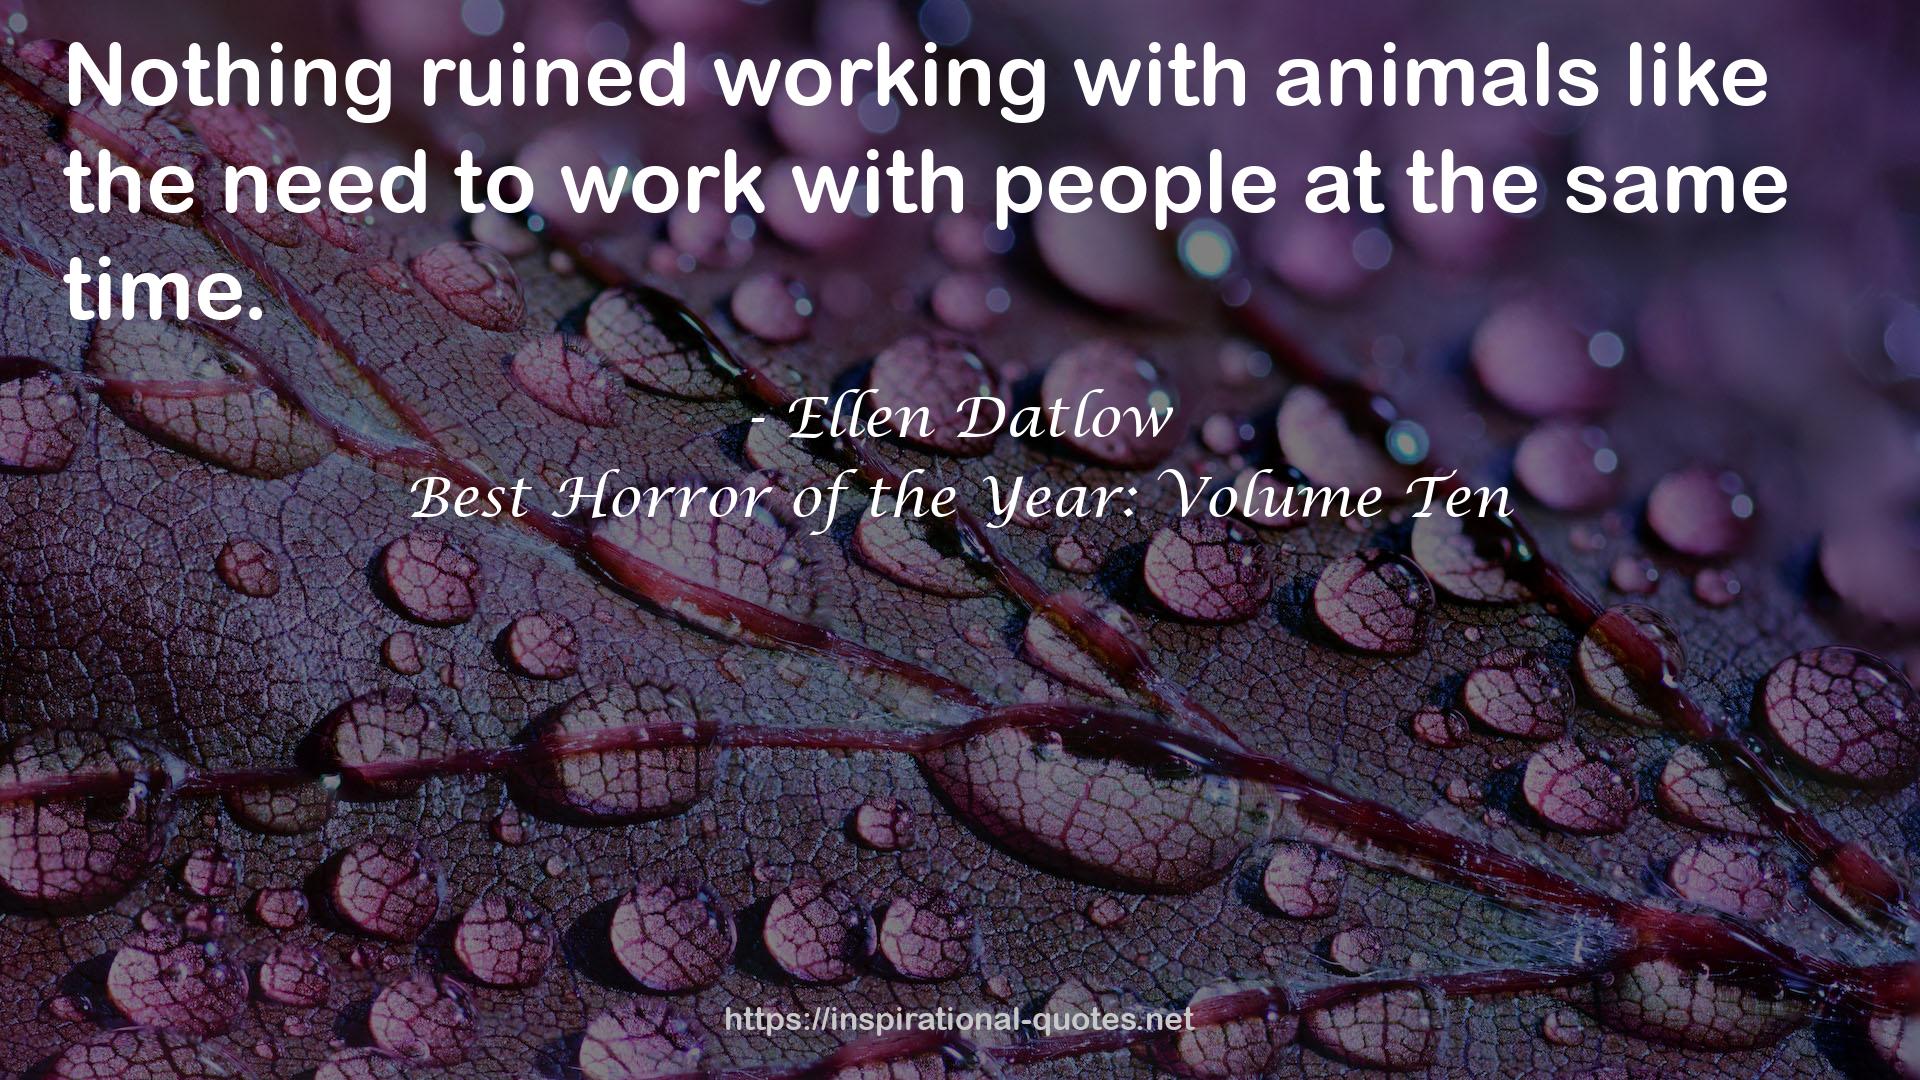 Best Horror of the Year: Volume Ten QUOTES